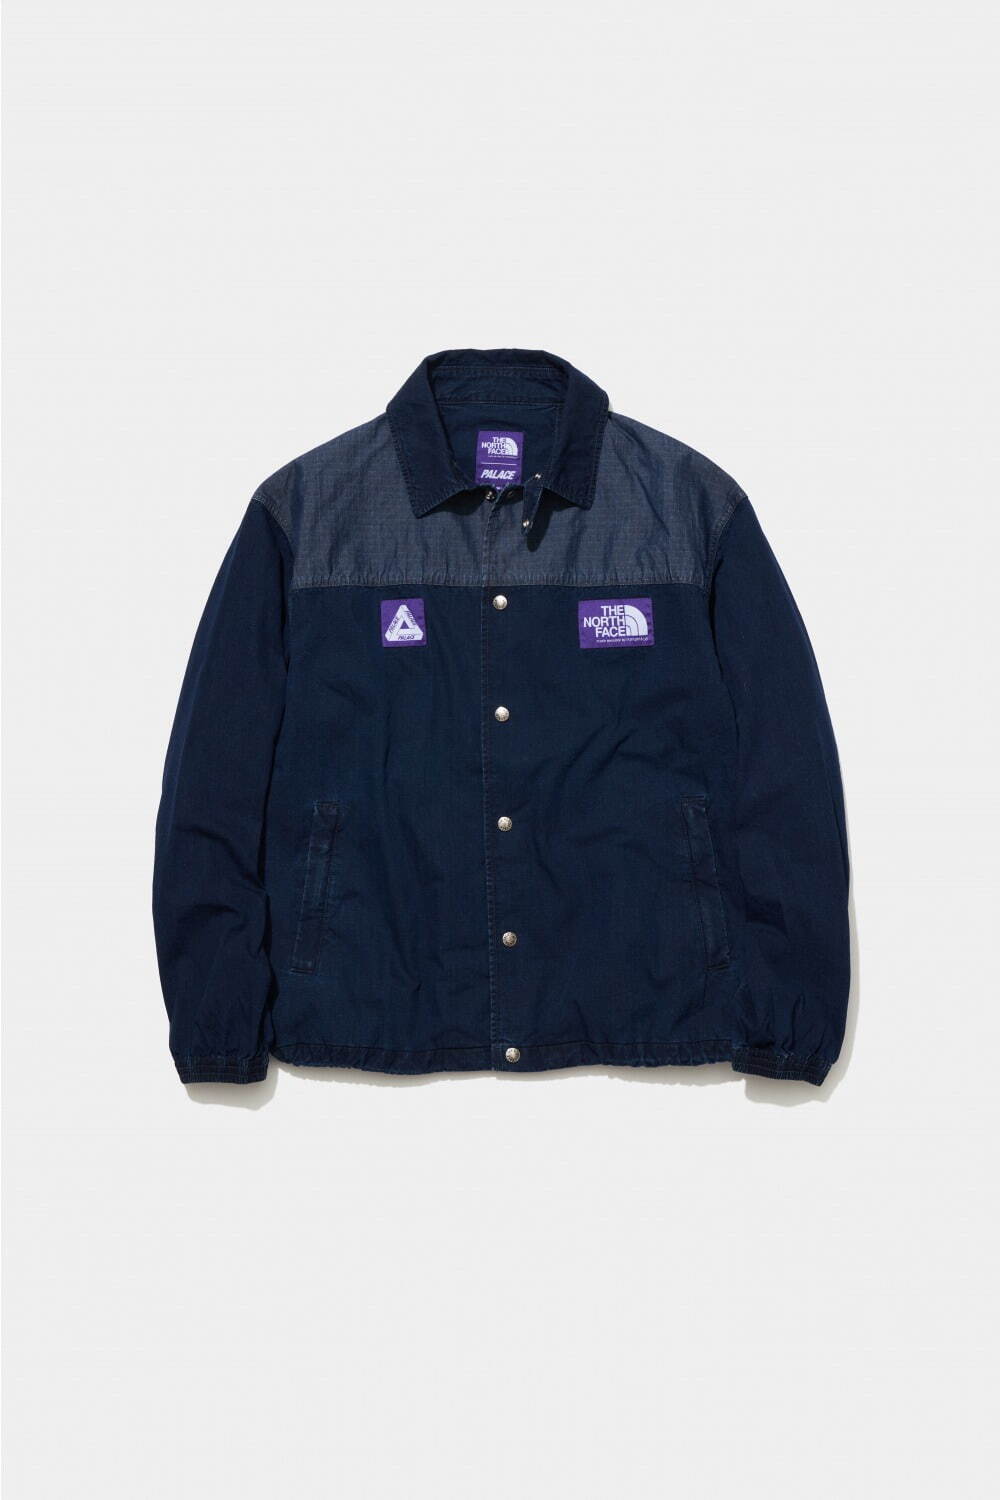 Palace North face purple label　セットアップ